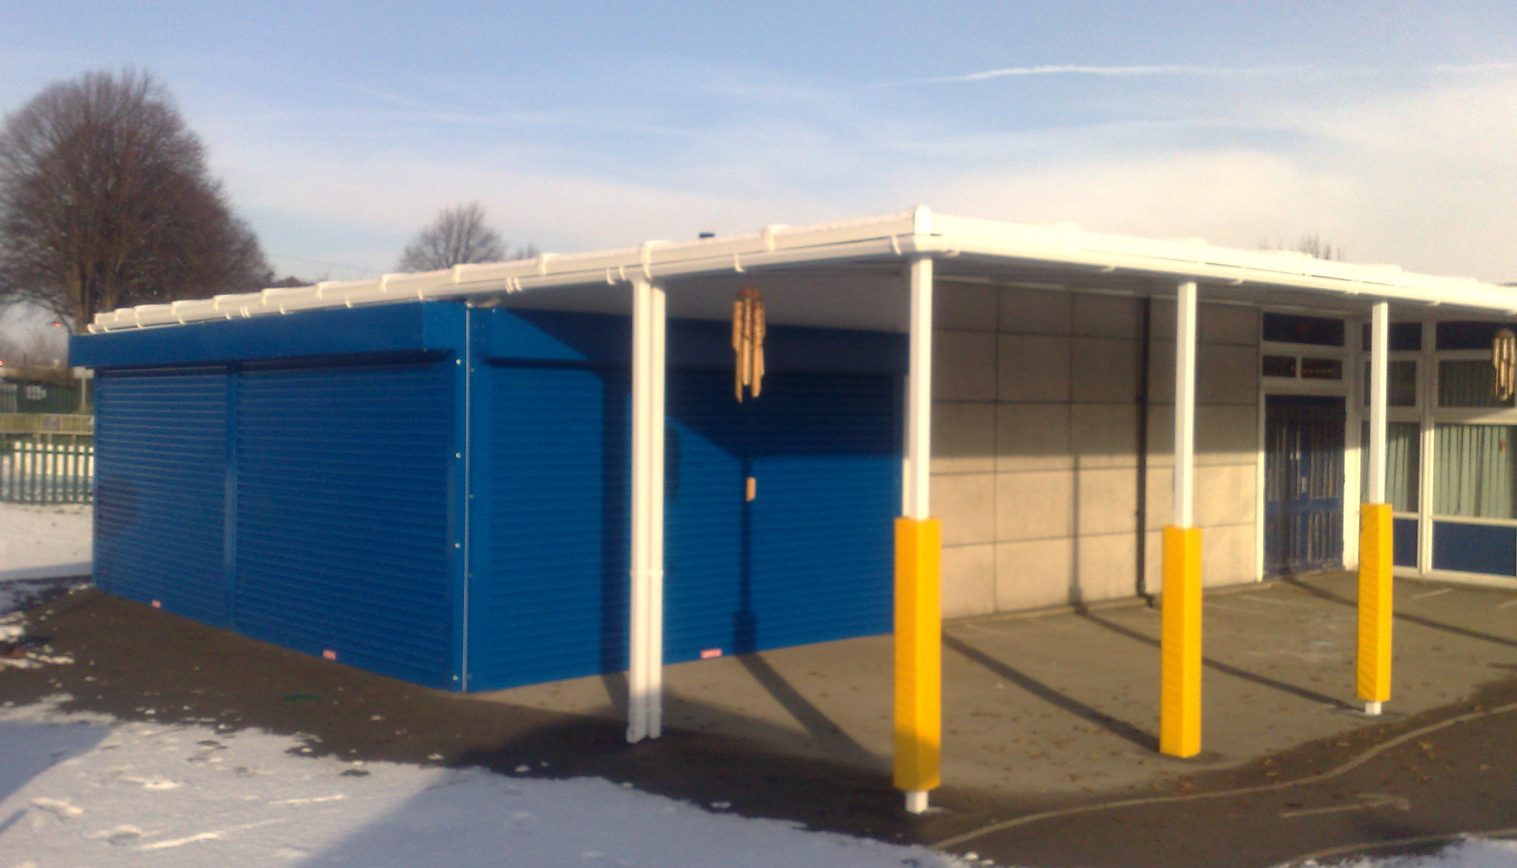 Shaw Wood Primary School – Wall Mounted Canopy